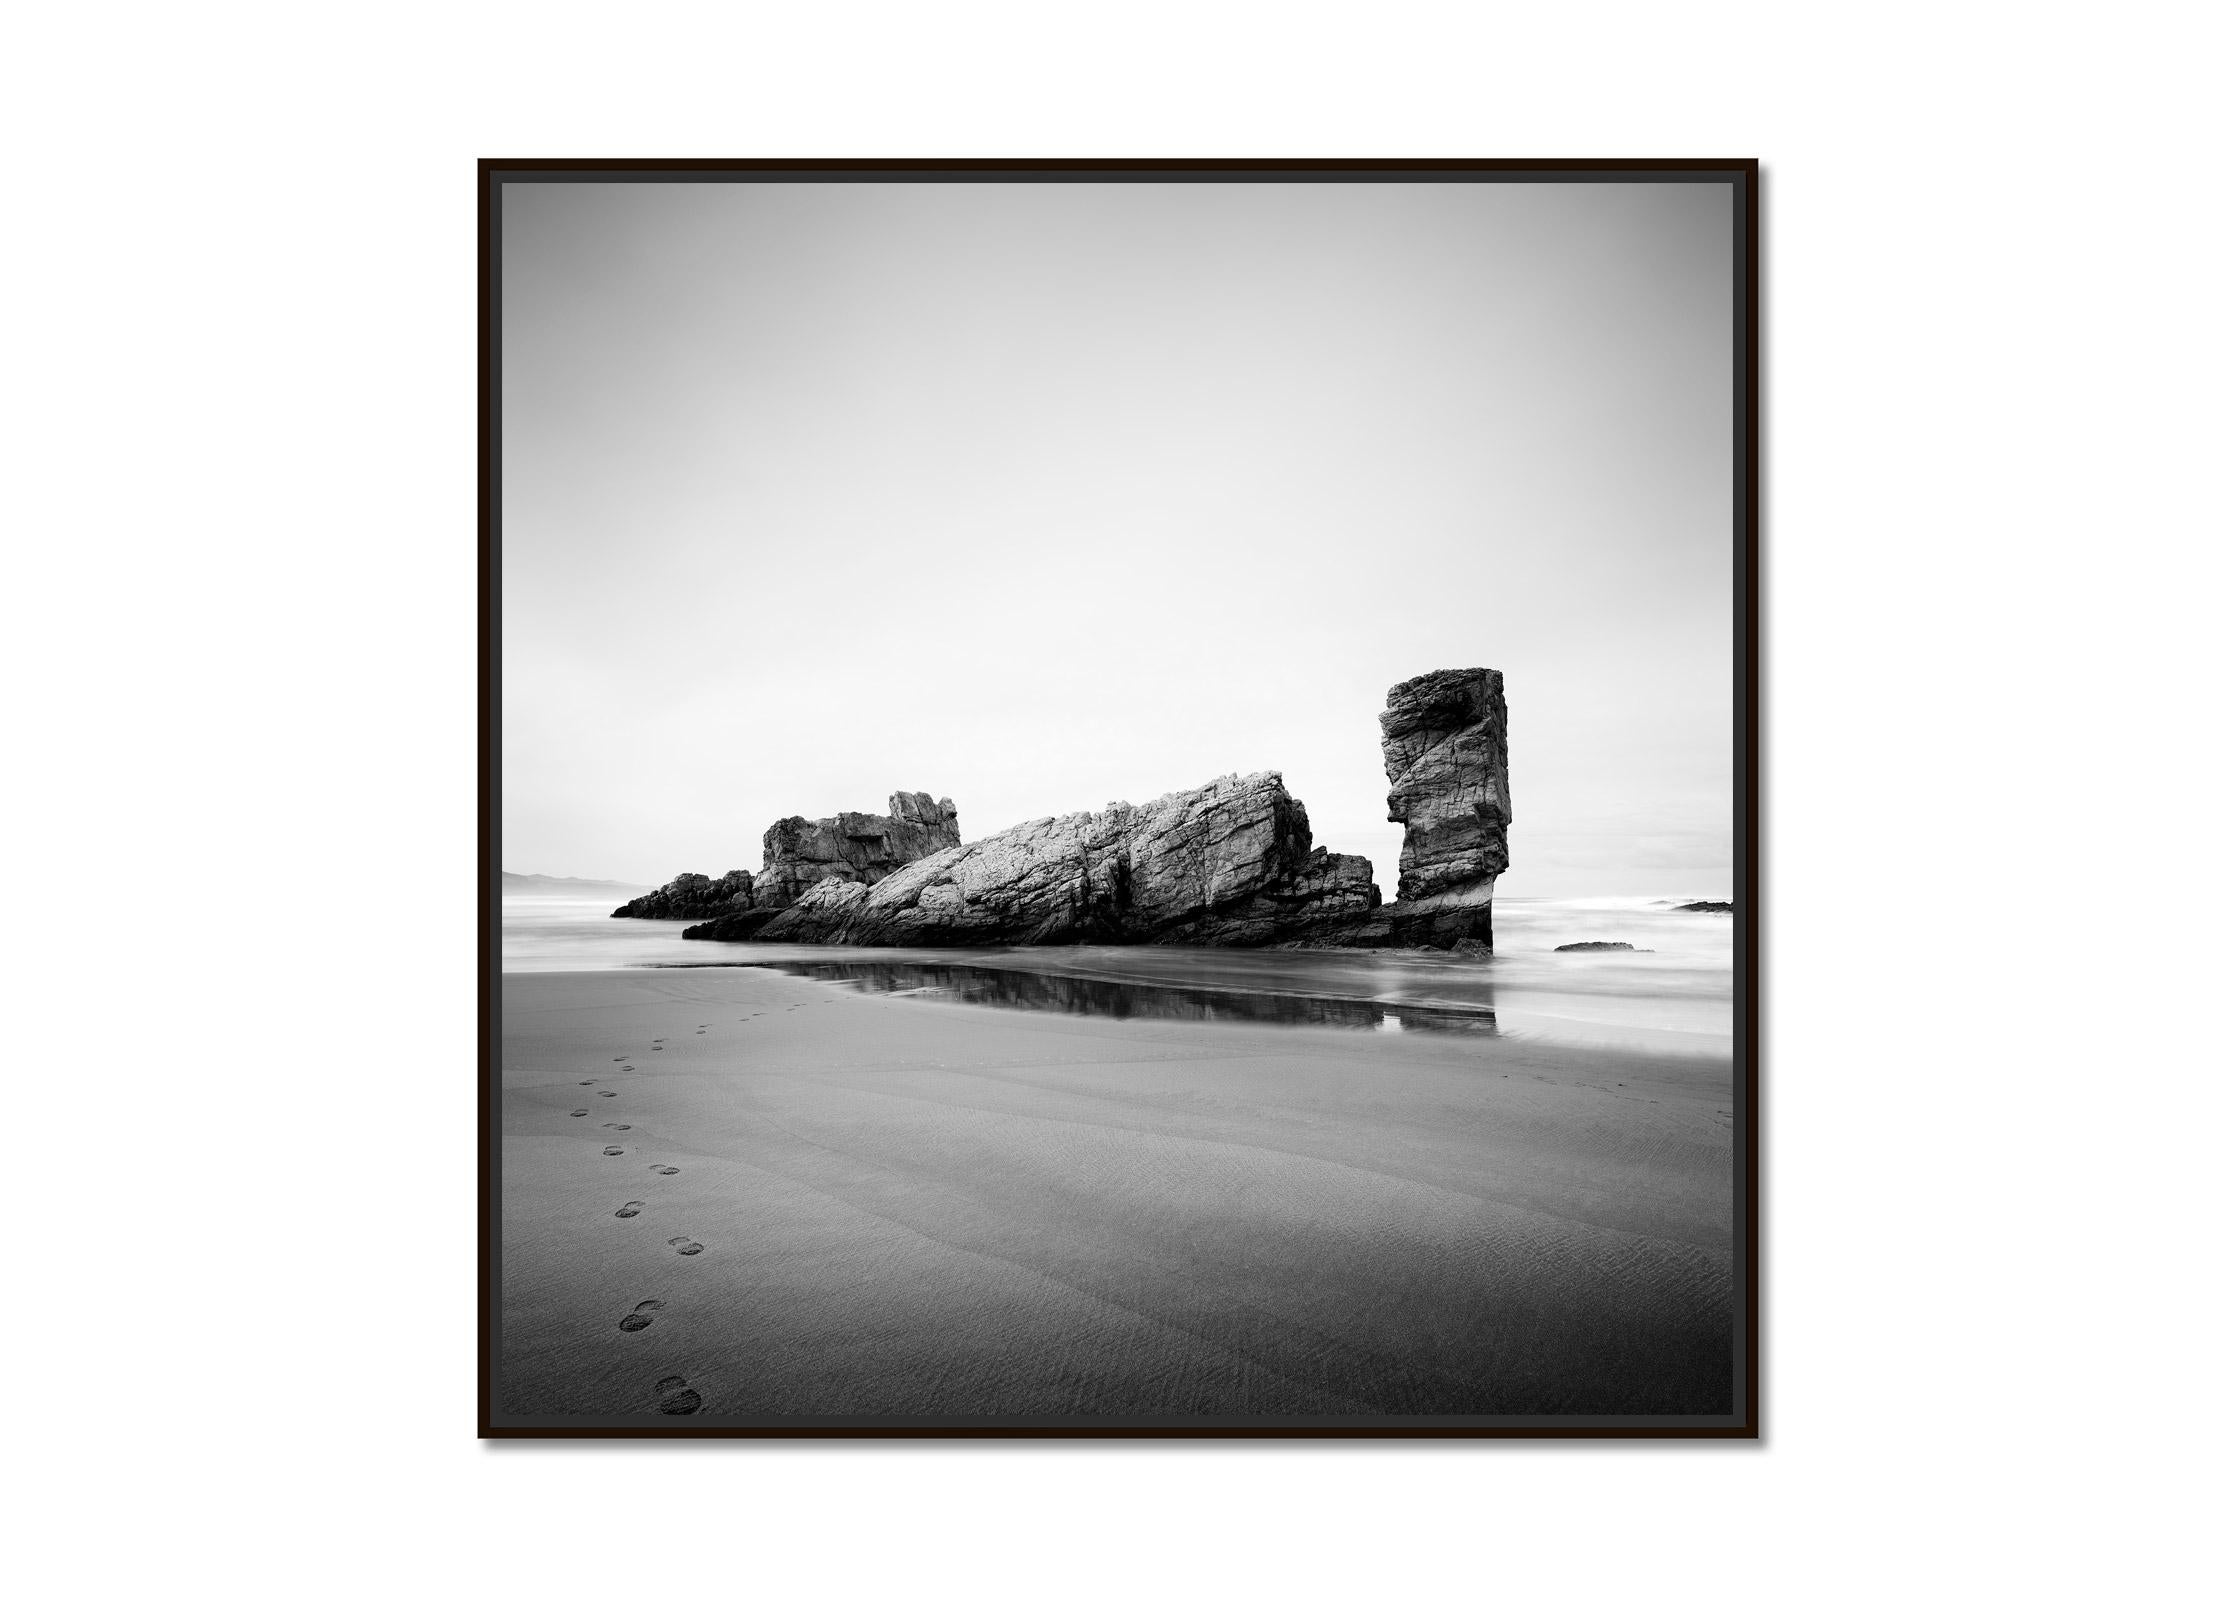 Bay of Biscay, giant rock, beach, Spain, black and white photography, landscape - Photograph by Gerald Berghammer